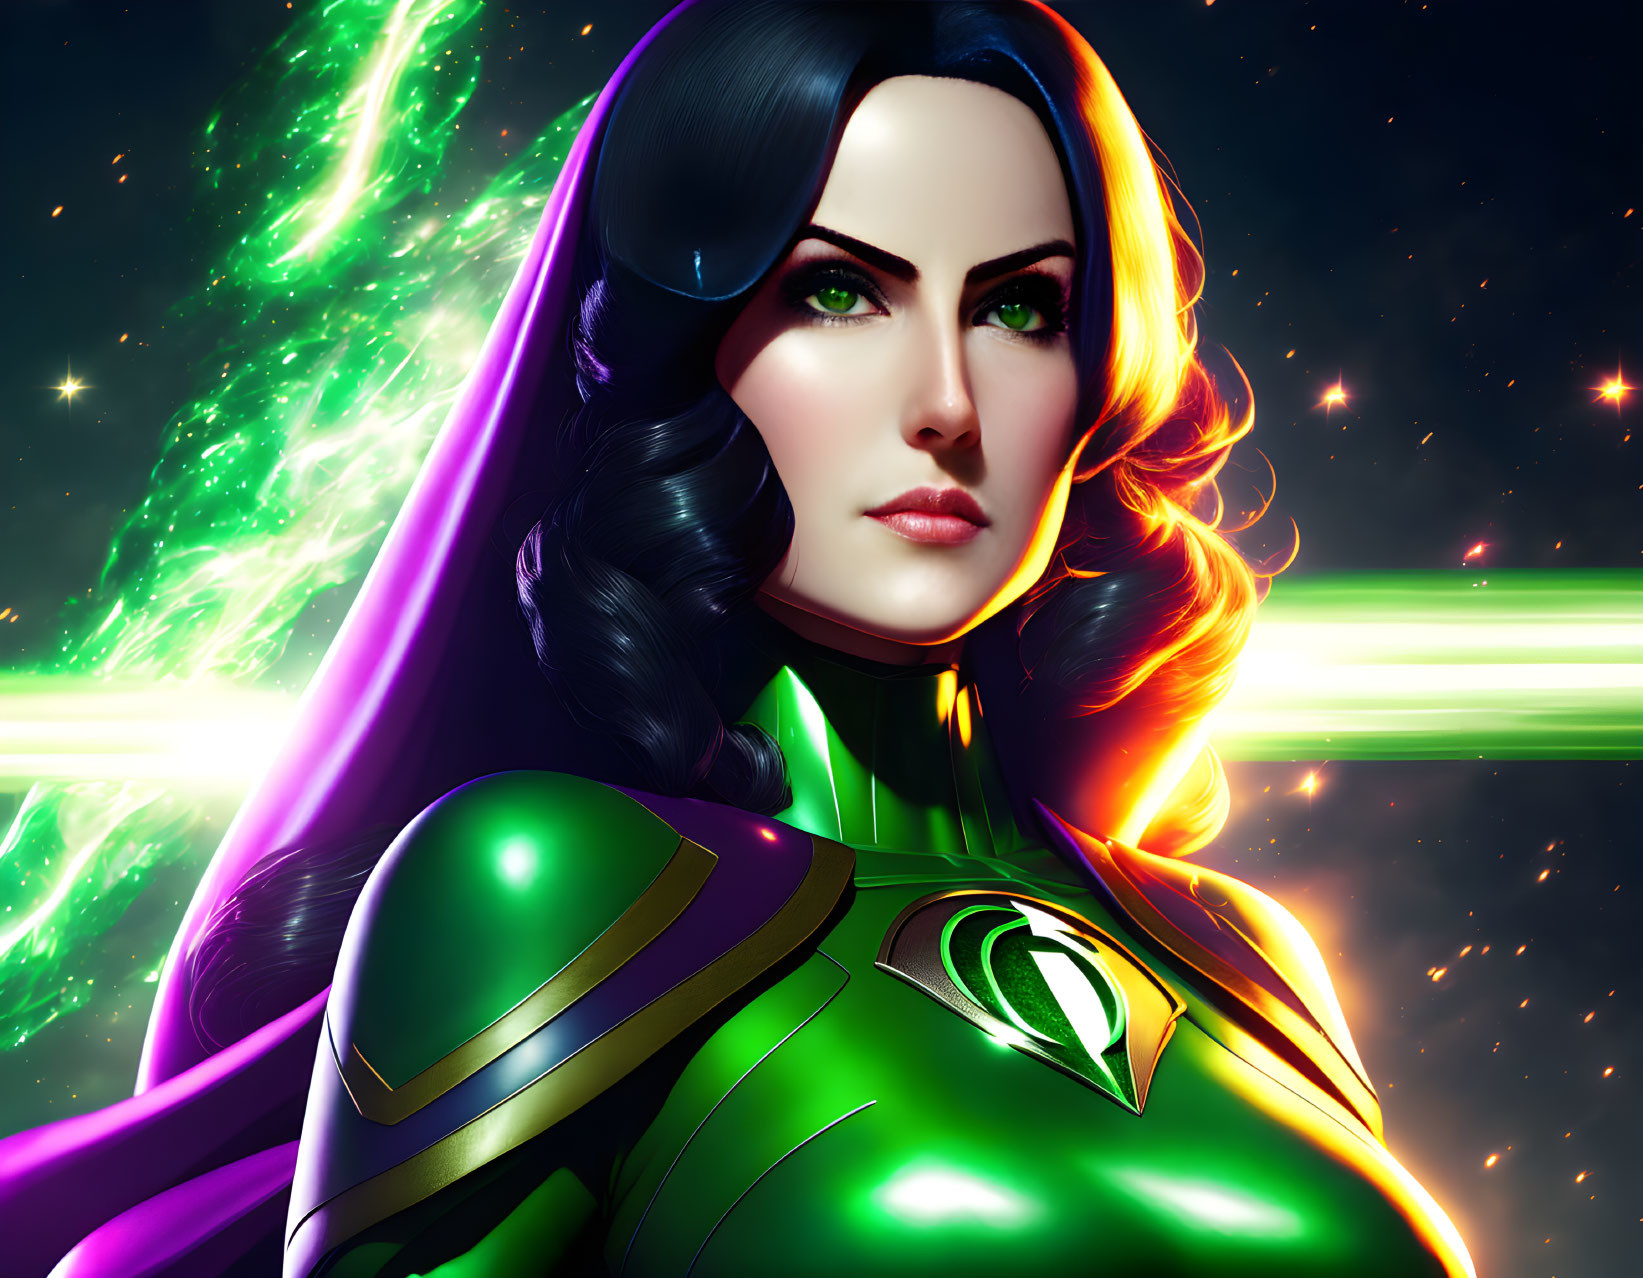 A Famous Anime Lana Luthor is the Green Lantern Wo